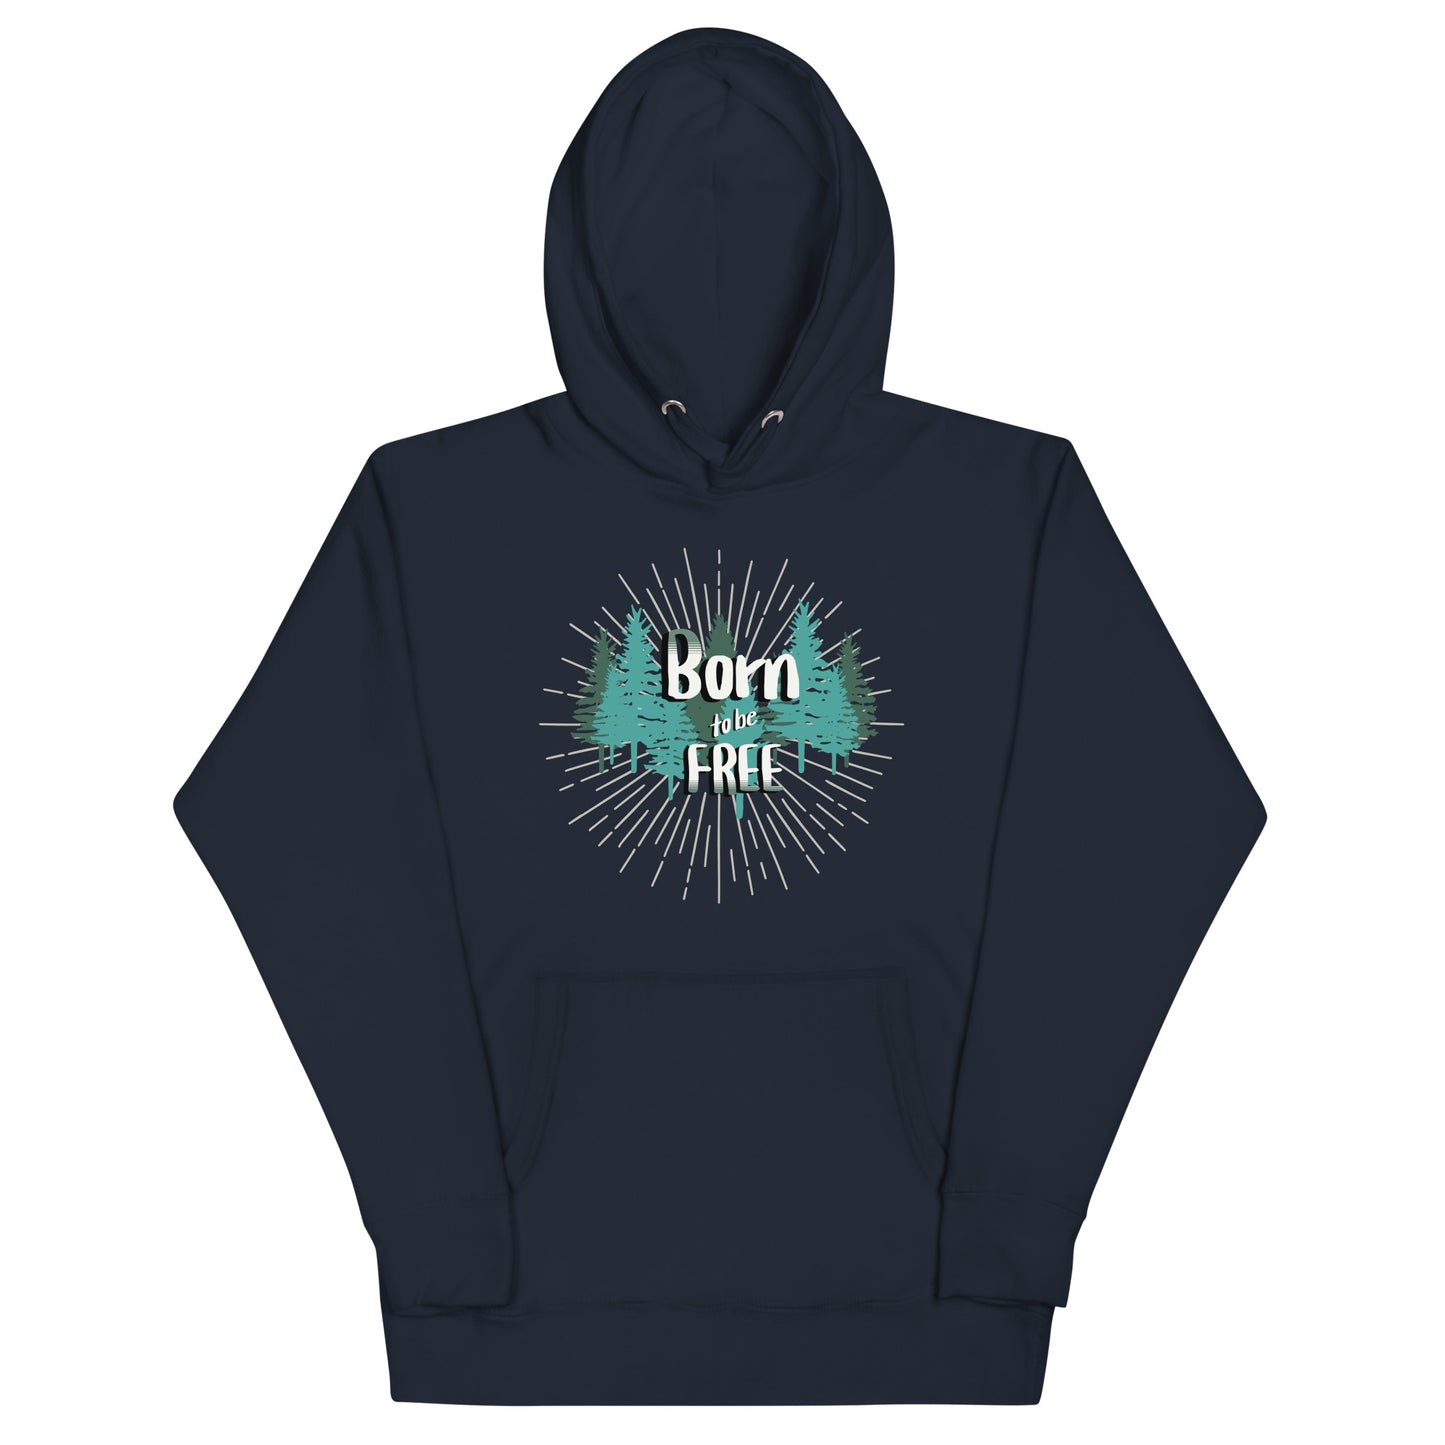 Born To Be Free - Unisex Hoodie